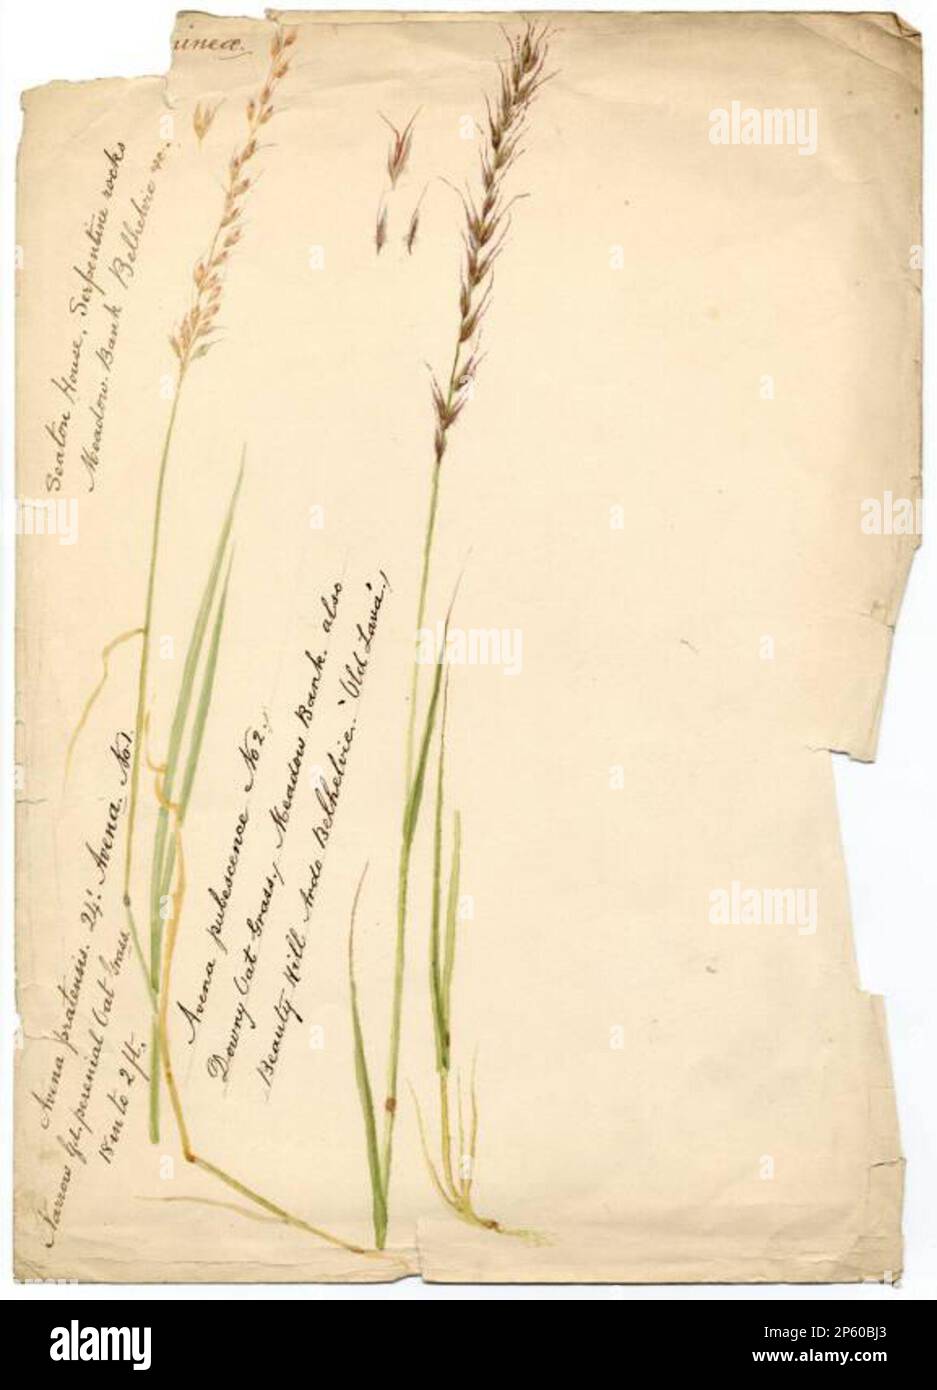 Downy Oat Grass (Helictotrichon pubescens), William Catto (Aberdeen, Scotland, 1843 - 1927) Stock Photo